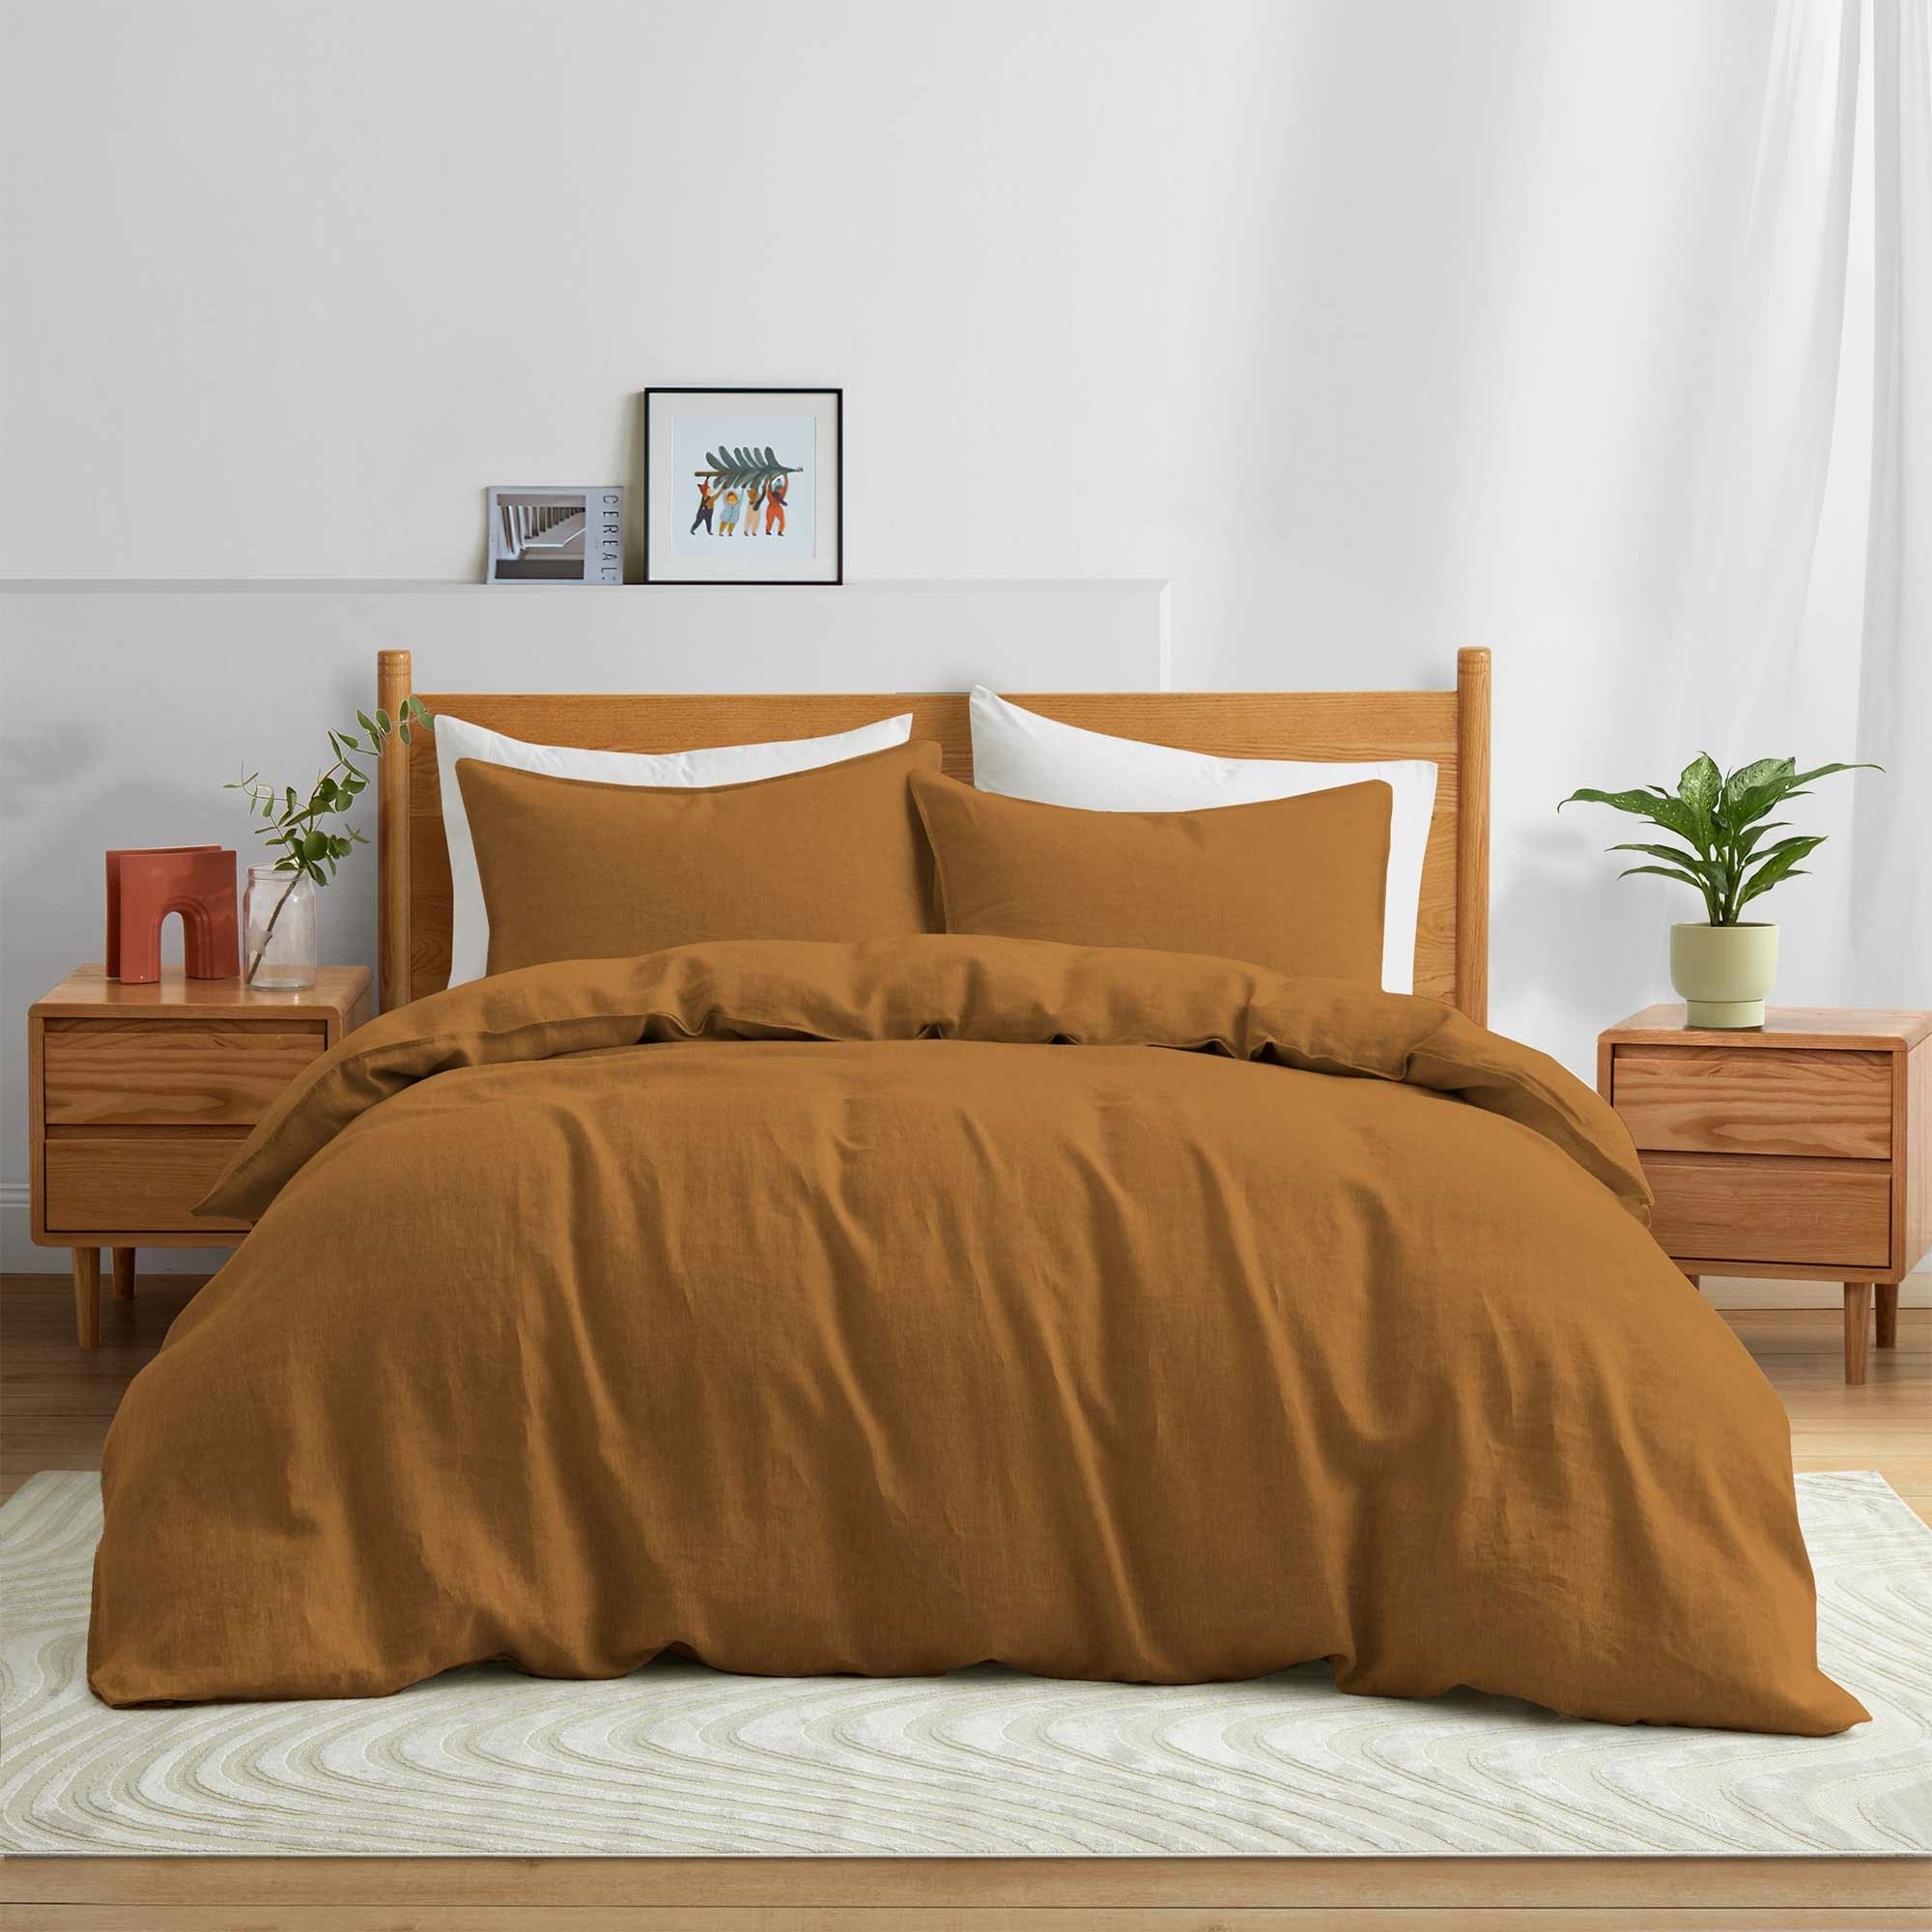 Premium Flax Linen Duvet Cover Set With Pillowcases Moisture Wicking And Breathable - Umber, Full/Queen